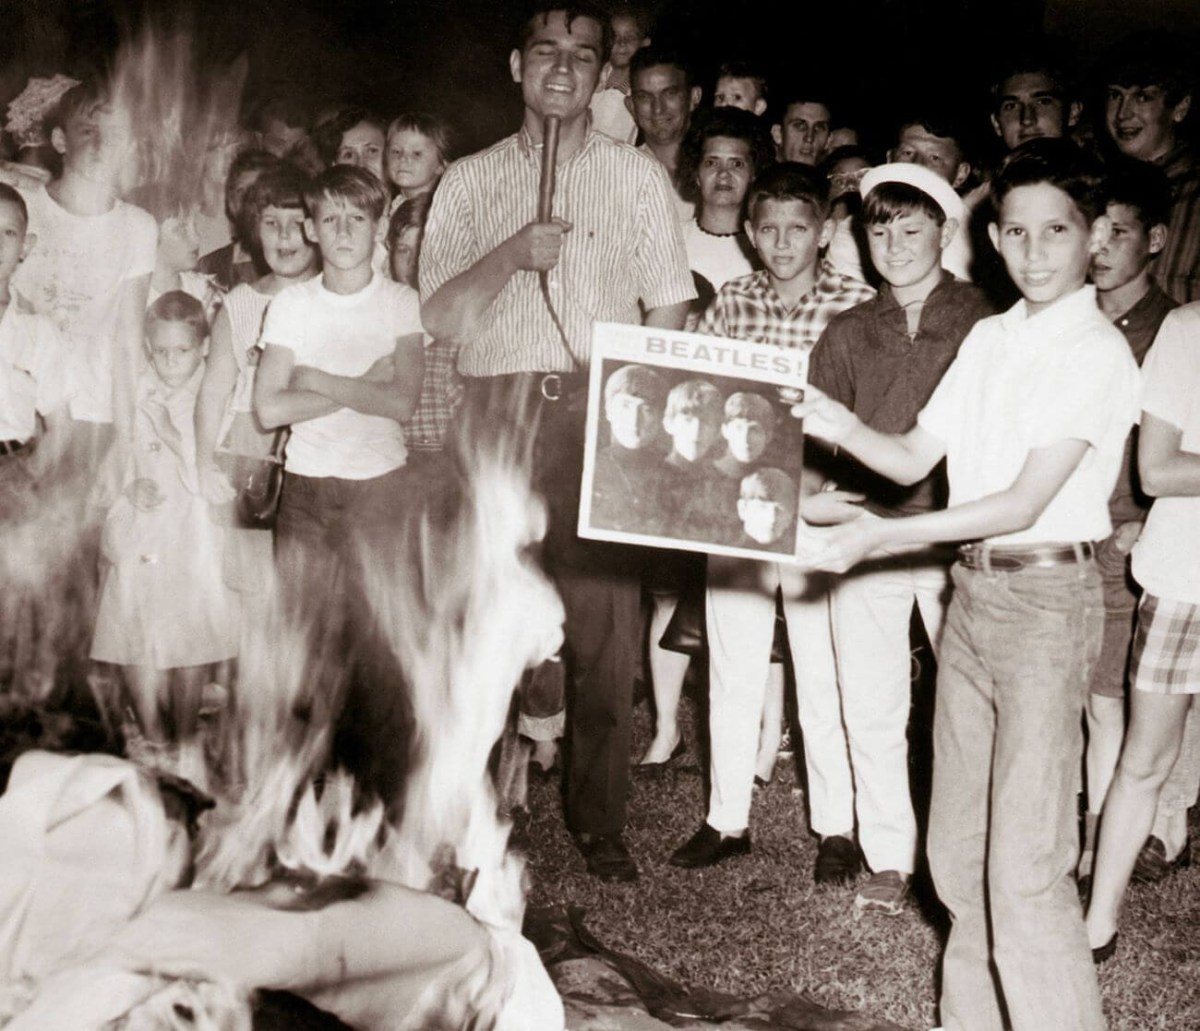 A black and white picture of a teenager burning a Beatles album in front of a crowd.